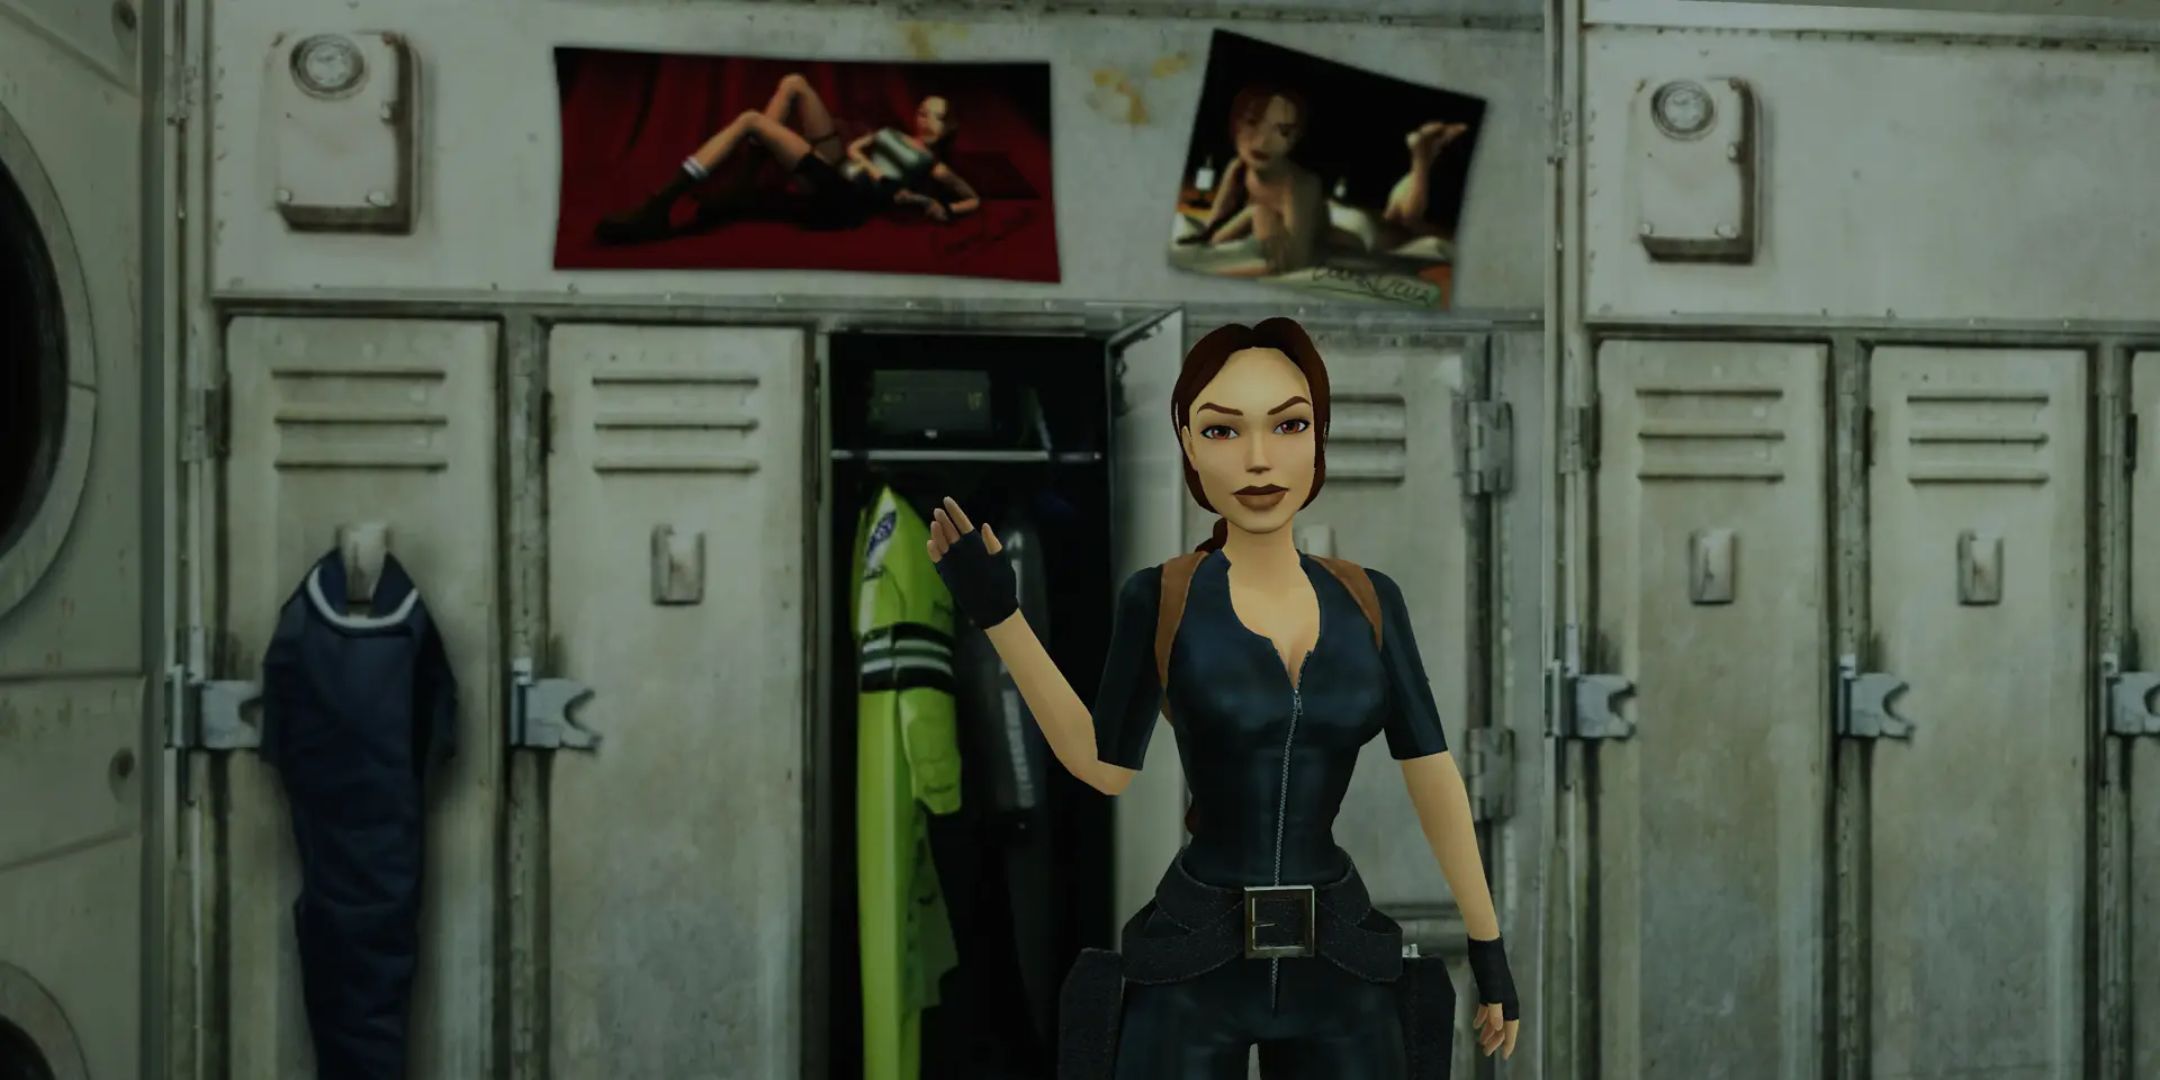 Posters that have since been removed from Tomb Raider 1-3 Remastered Trilogy.